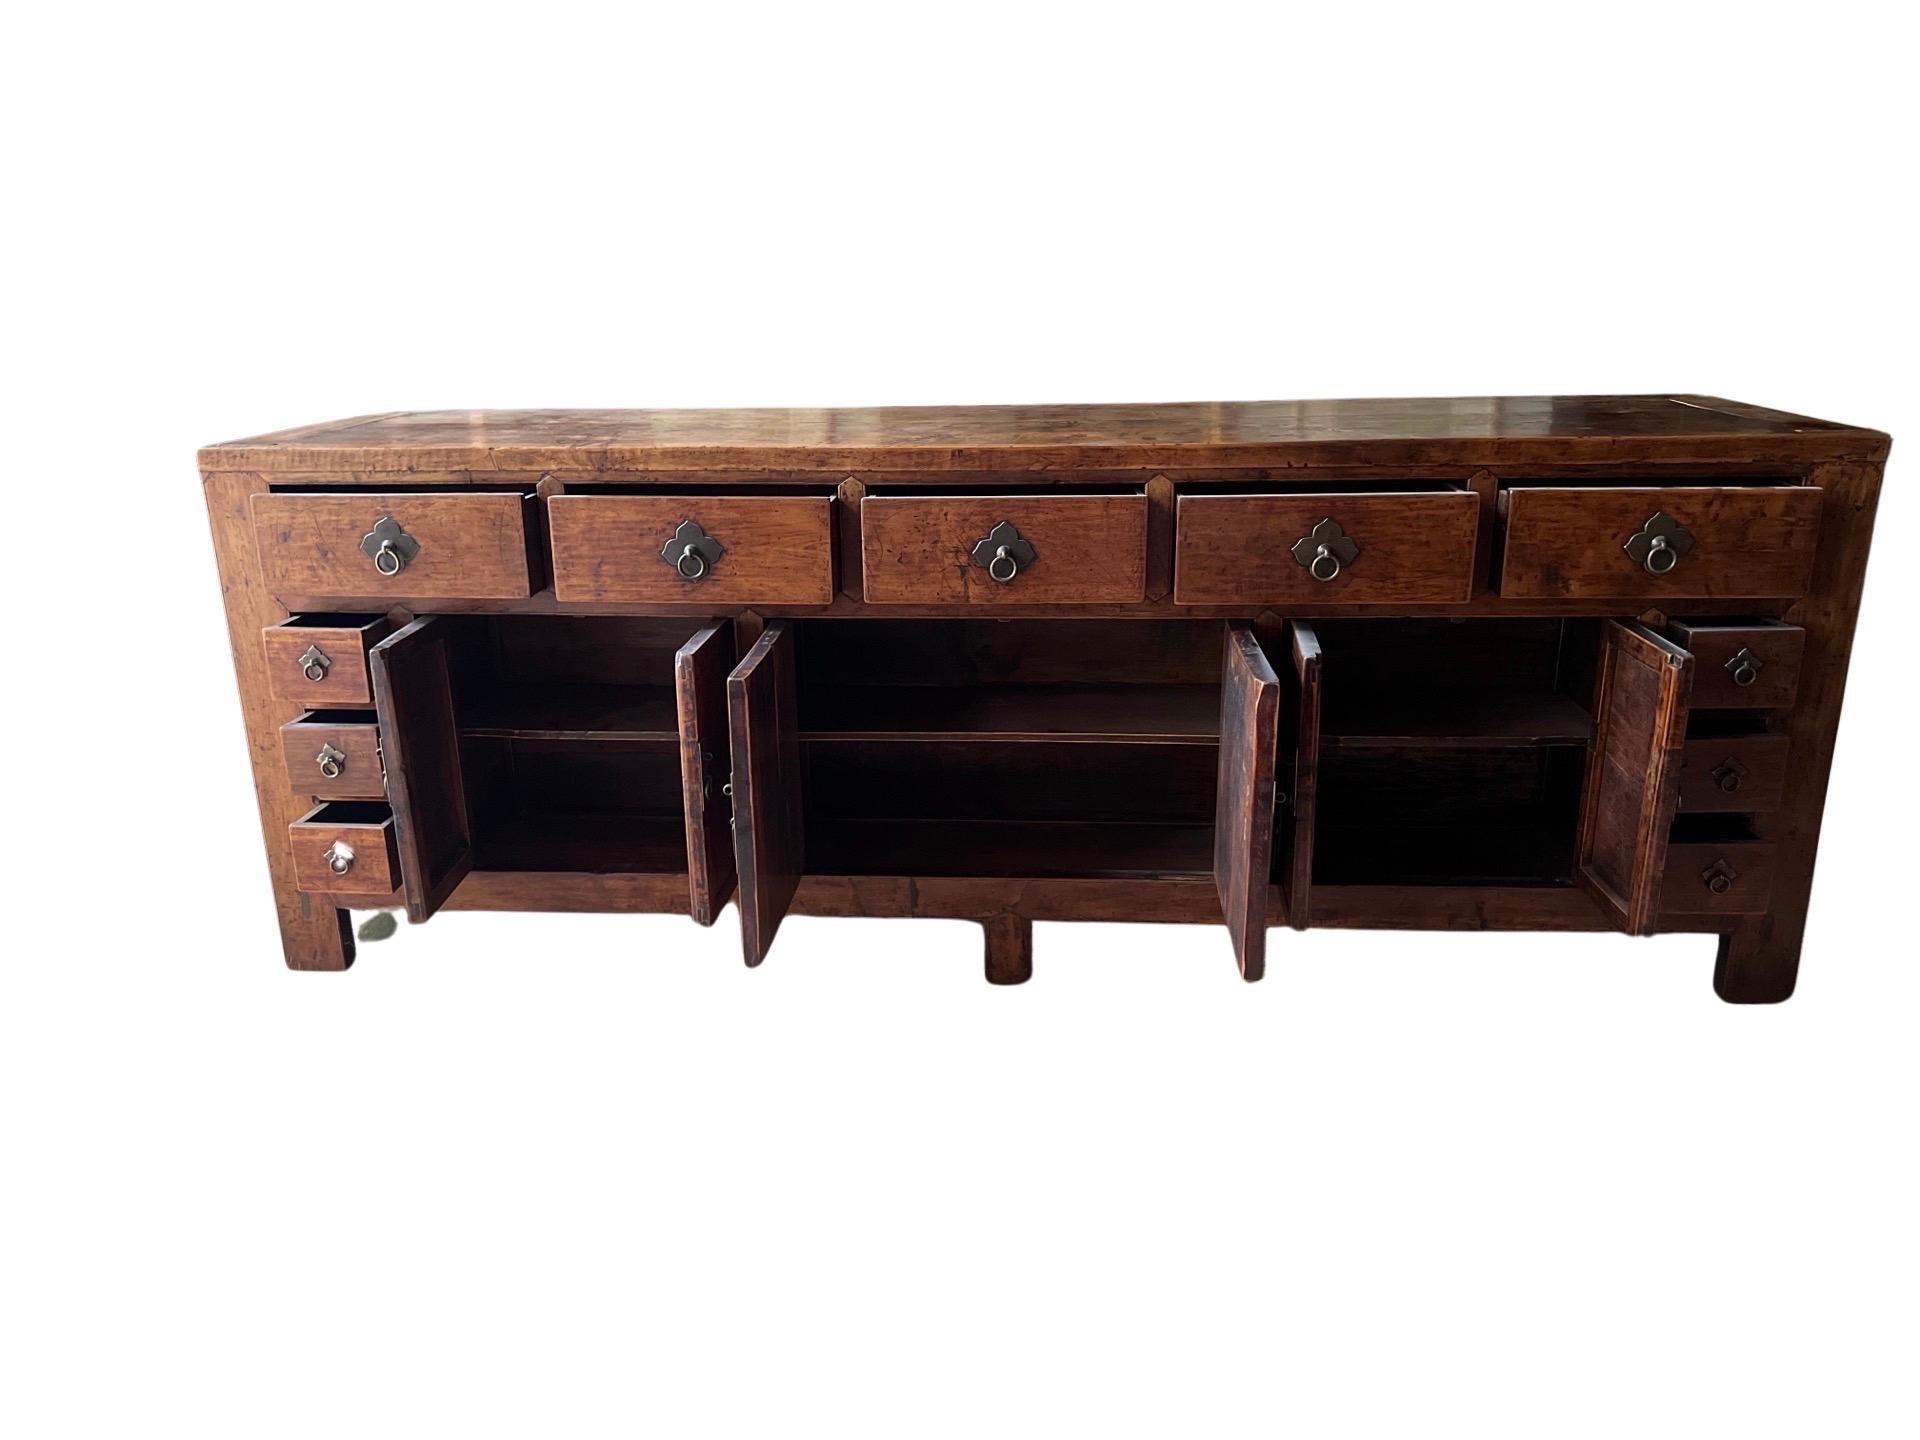 19th Century 19th C. Monumental & Important Qing Dynasty Chinese Double Sided Sideboard For Sale